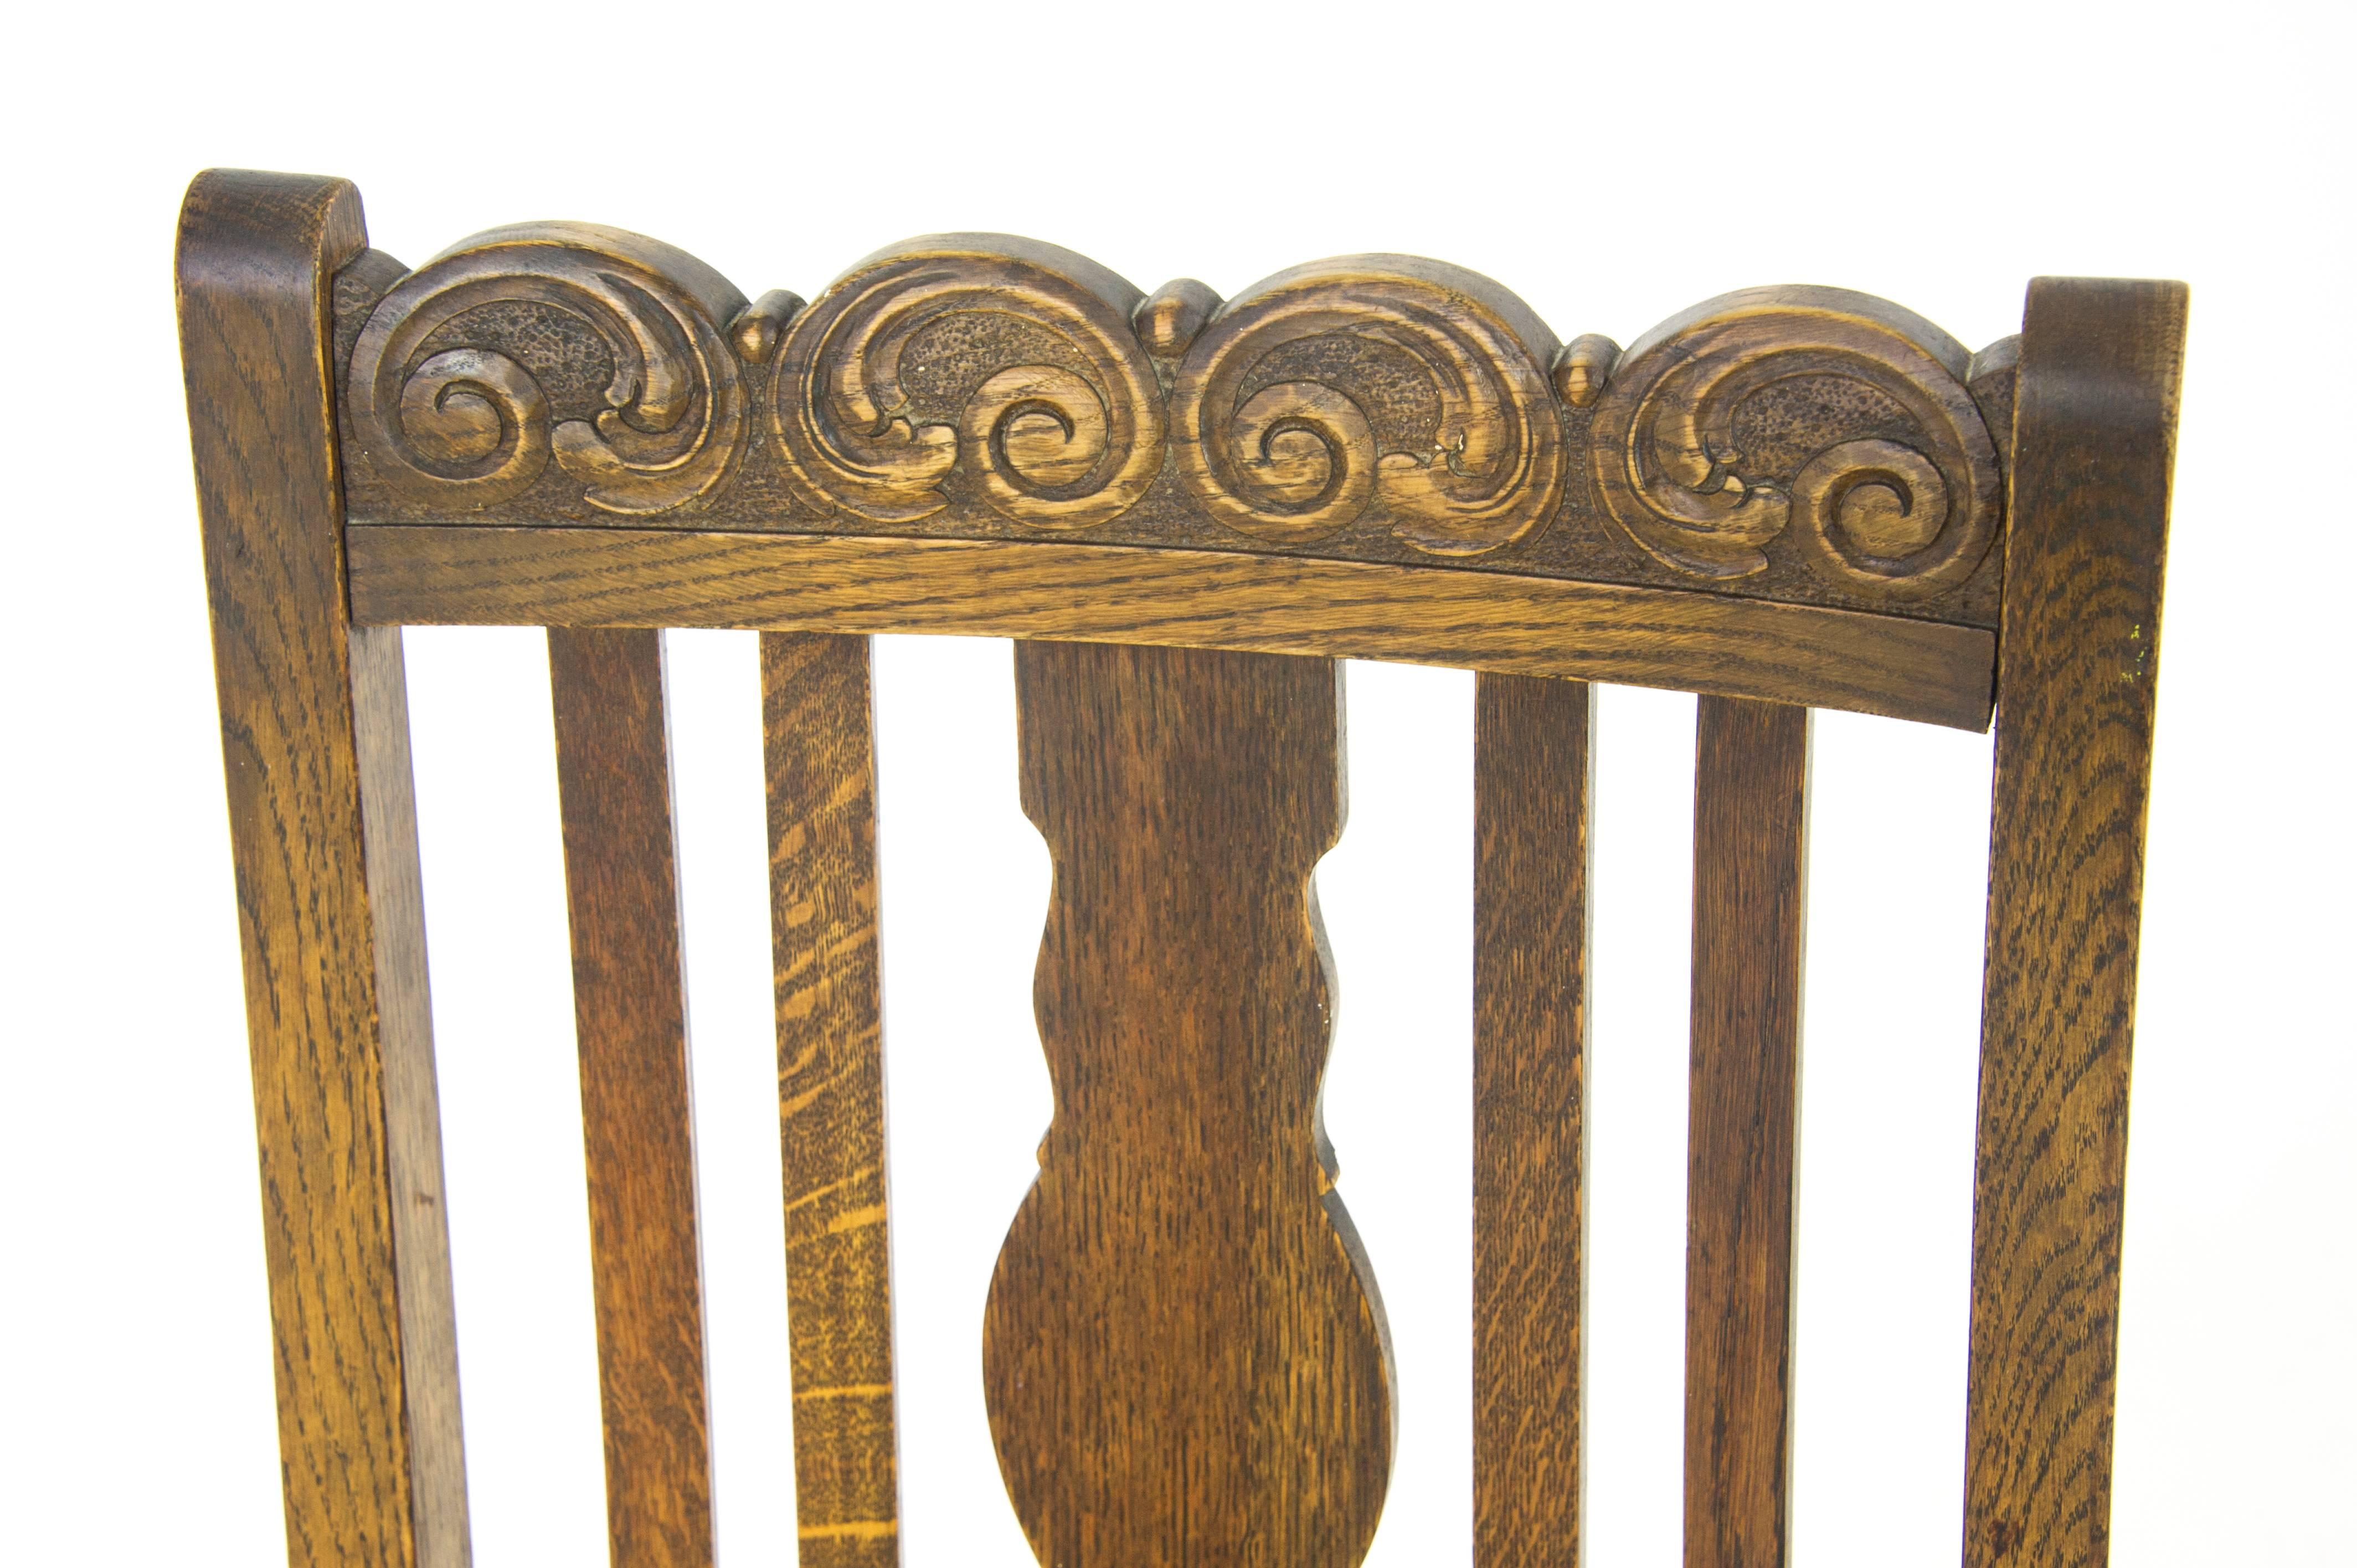 Hand-Crafted Antique Dining Chairs Six, Barley Twist Oak, Antique Furniture, Scotland, 1920s